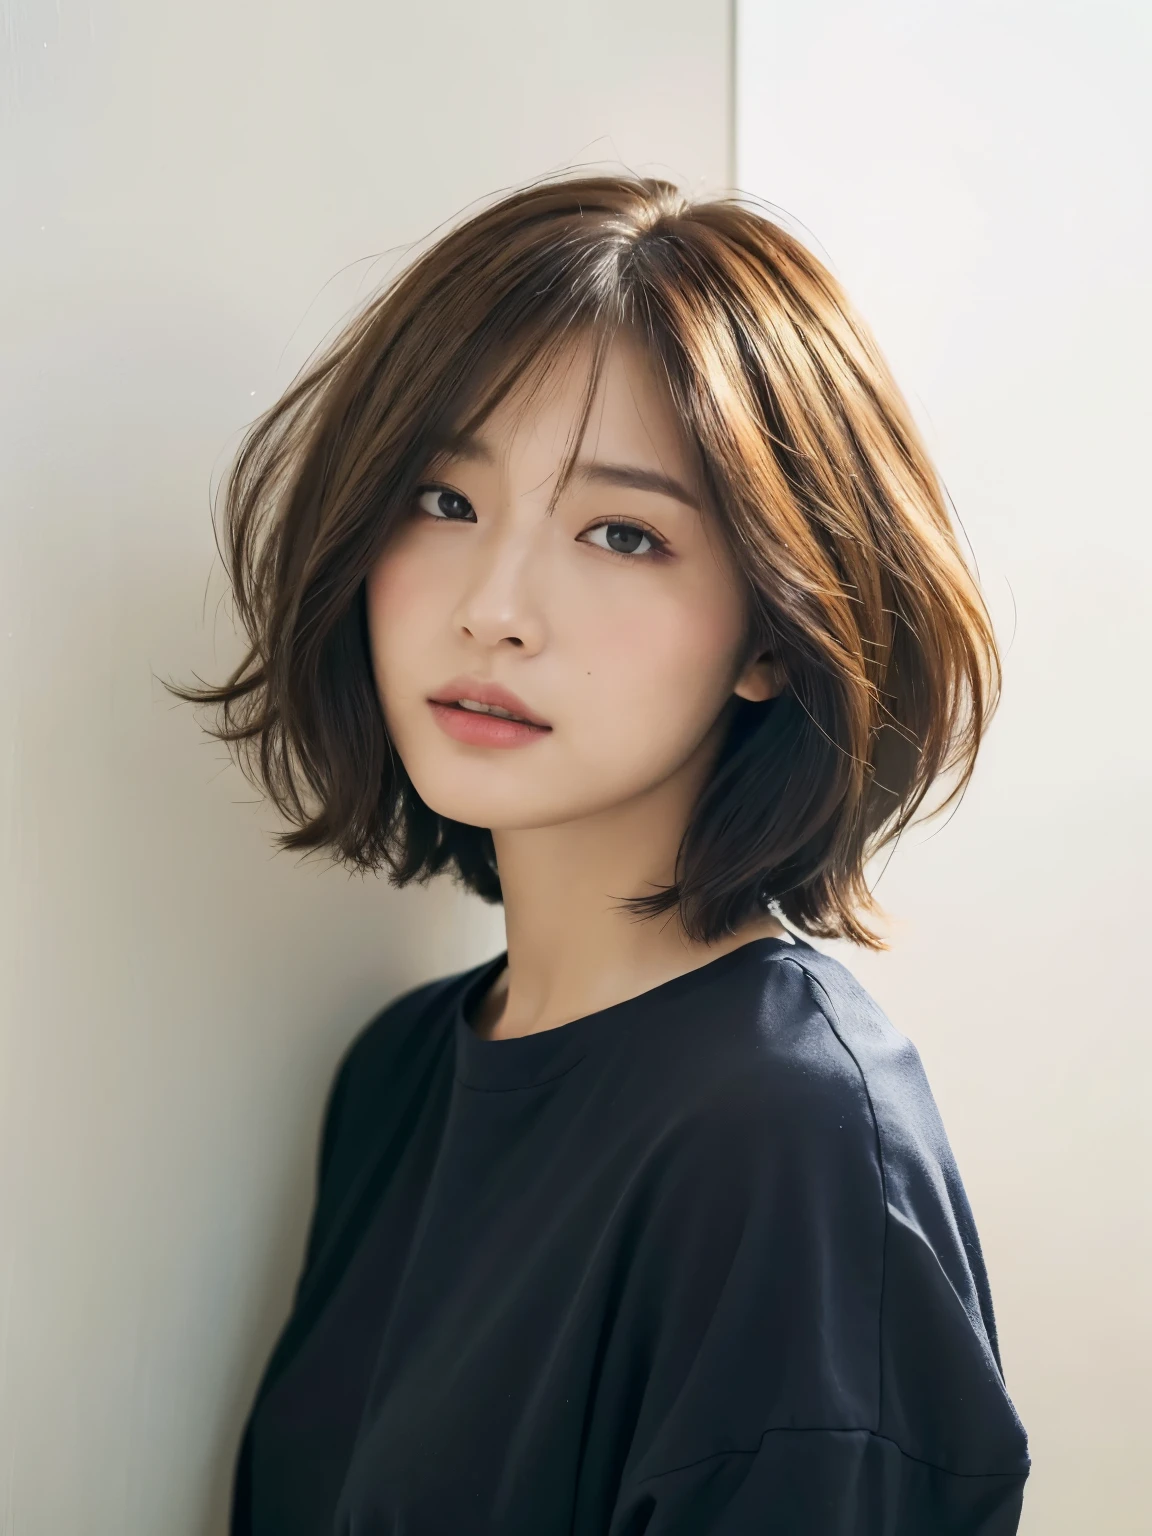 (Layered Haircut:1.2))、short wavy hair、8K、（Raw photography）、（top-quality）、（photorealistic：1.4）Realistic to the touch Realistic、(4Khigh-level image quality:1.2)、(High resolution, masutepiece, top-qualityの, high detailing, Official: 1.4), (Realistic: 1.2, hyper realistic: 1.1, photorealisticです: 1.37), depth of fields, (Detailed description of hair), (Detailed description of face), Incomparable beauty,, (35 years old,: 1.4)、slightly depressed、white walls、Taken in front of the white door、(white walls room with window)、natural soft light、short-hair、bobhairhair、reallistic、high-level image quality、hiquality、profile、assorted poses、profile、bobhair、Random Poses、Autumn clothes、Winter clothes、 Necklace